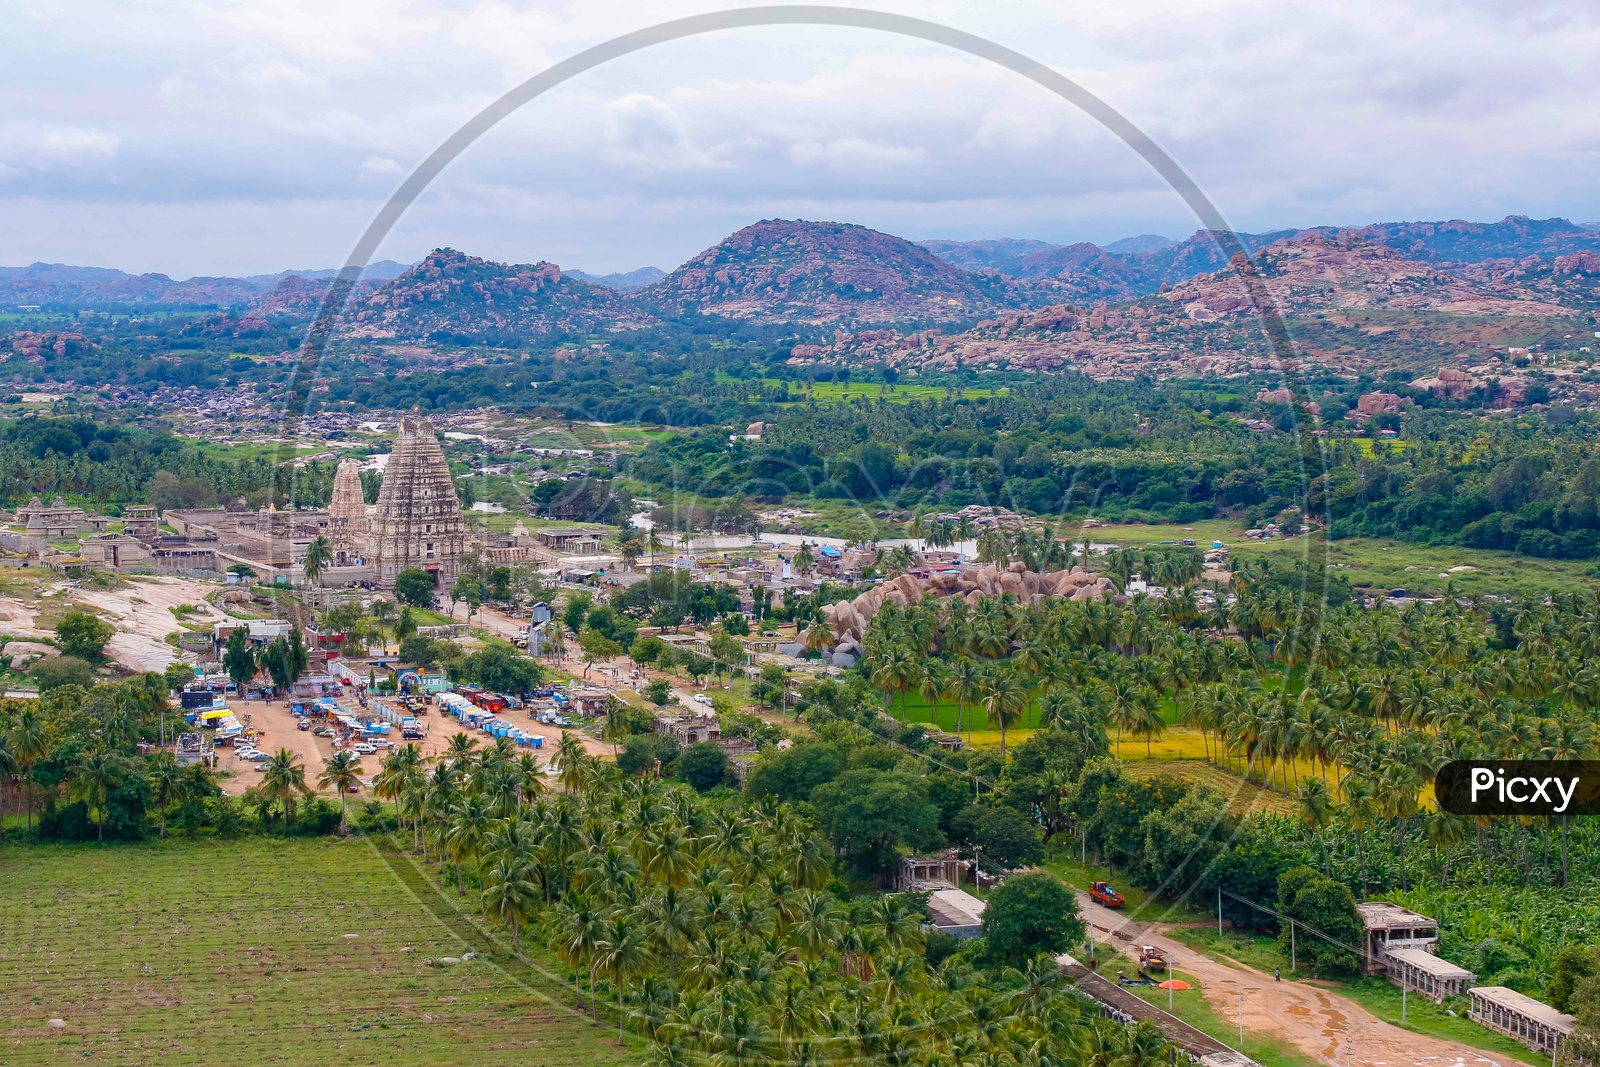 Beautiful Landscape of virupaksha temple with mountains in the background